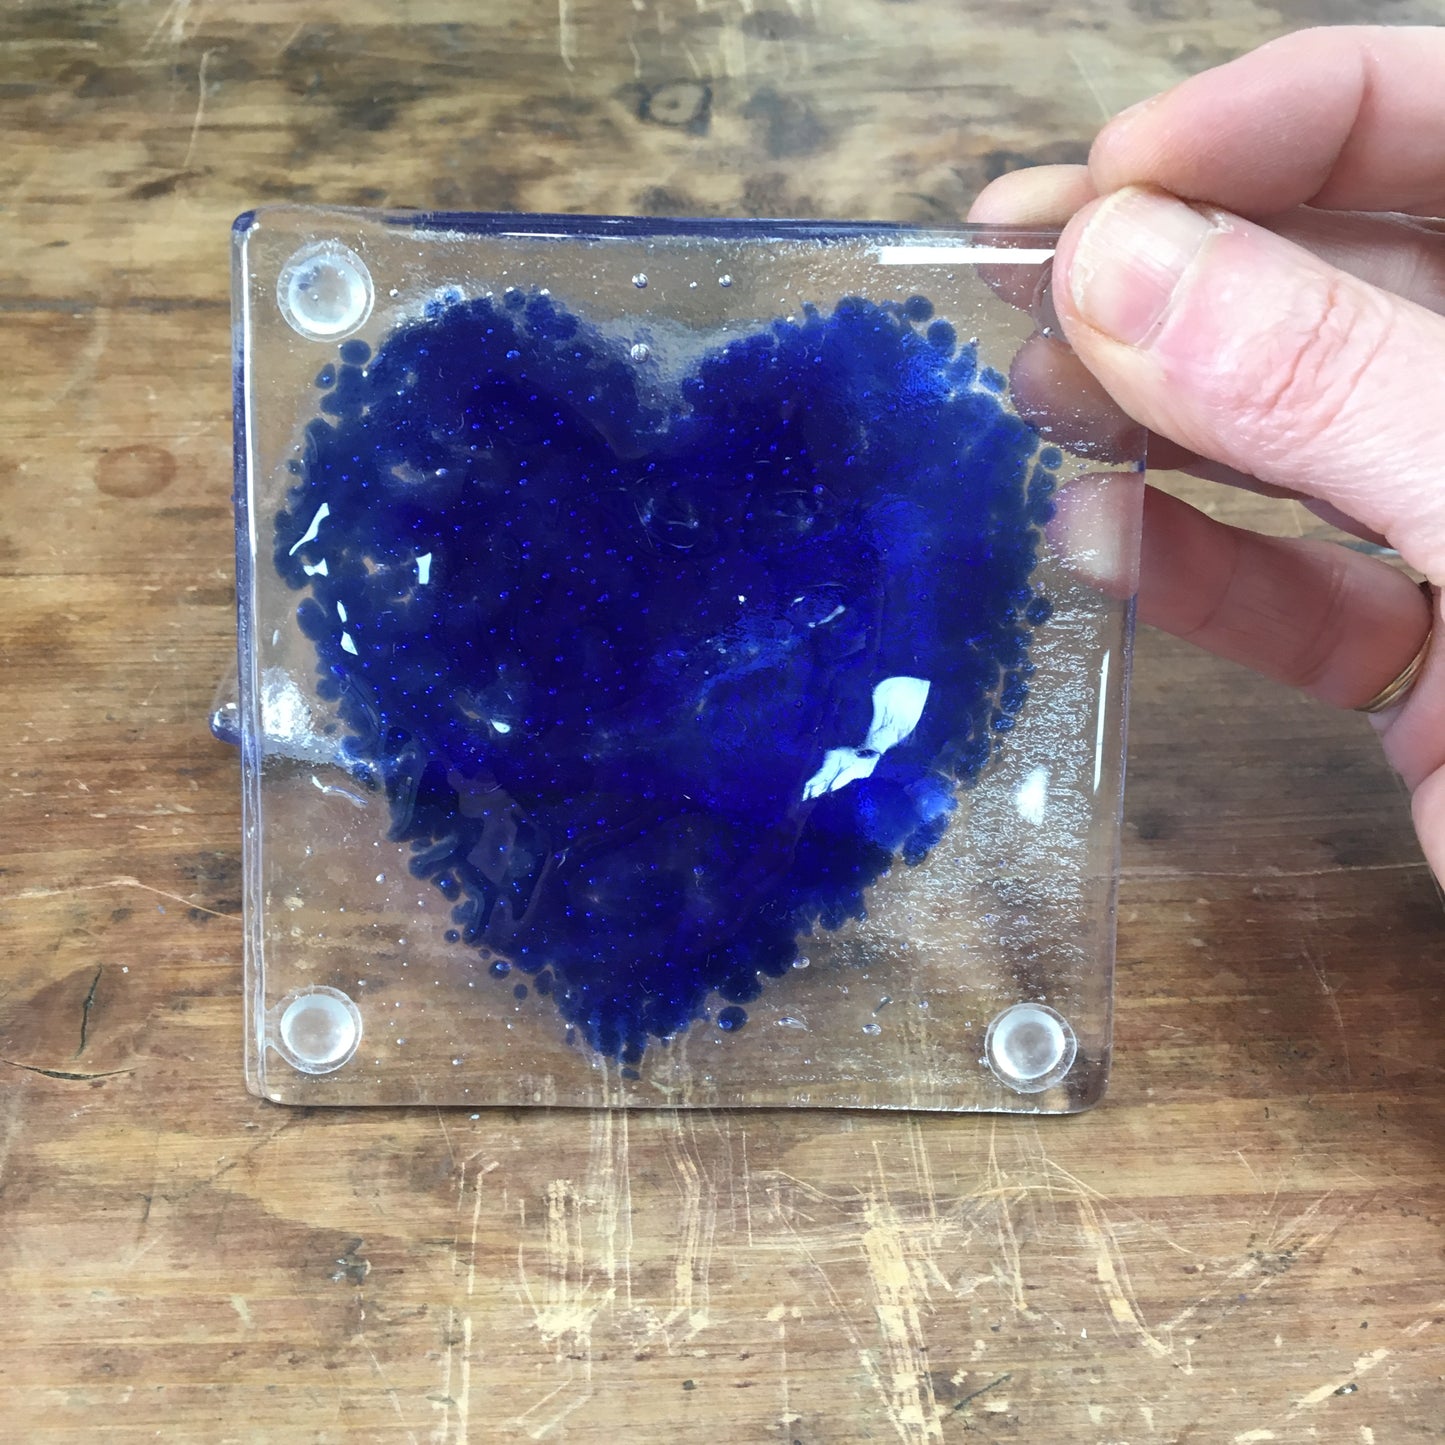 Dadswell Glass, Handmade fused glass coasters, Bristol Blue hearts on clear glass. Beautiful coasters to adorn your home. Made at Glass Designs a Bristol Gift shop.  Edit alt text